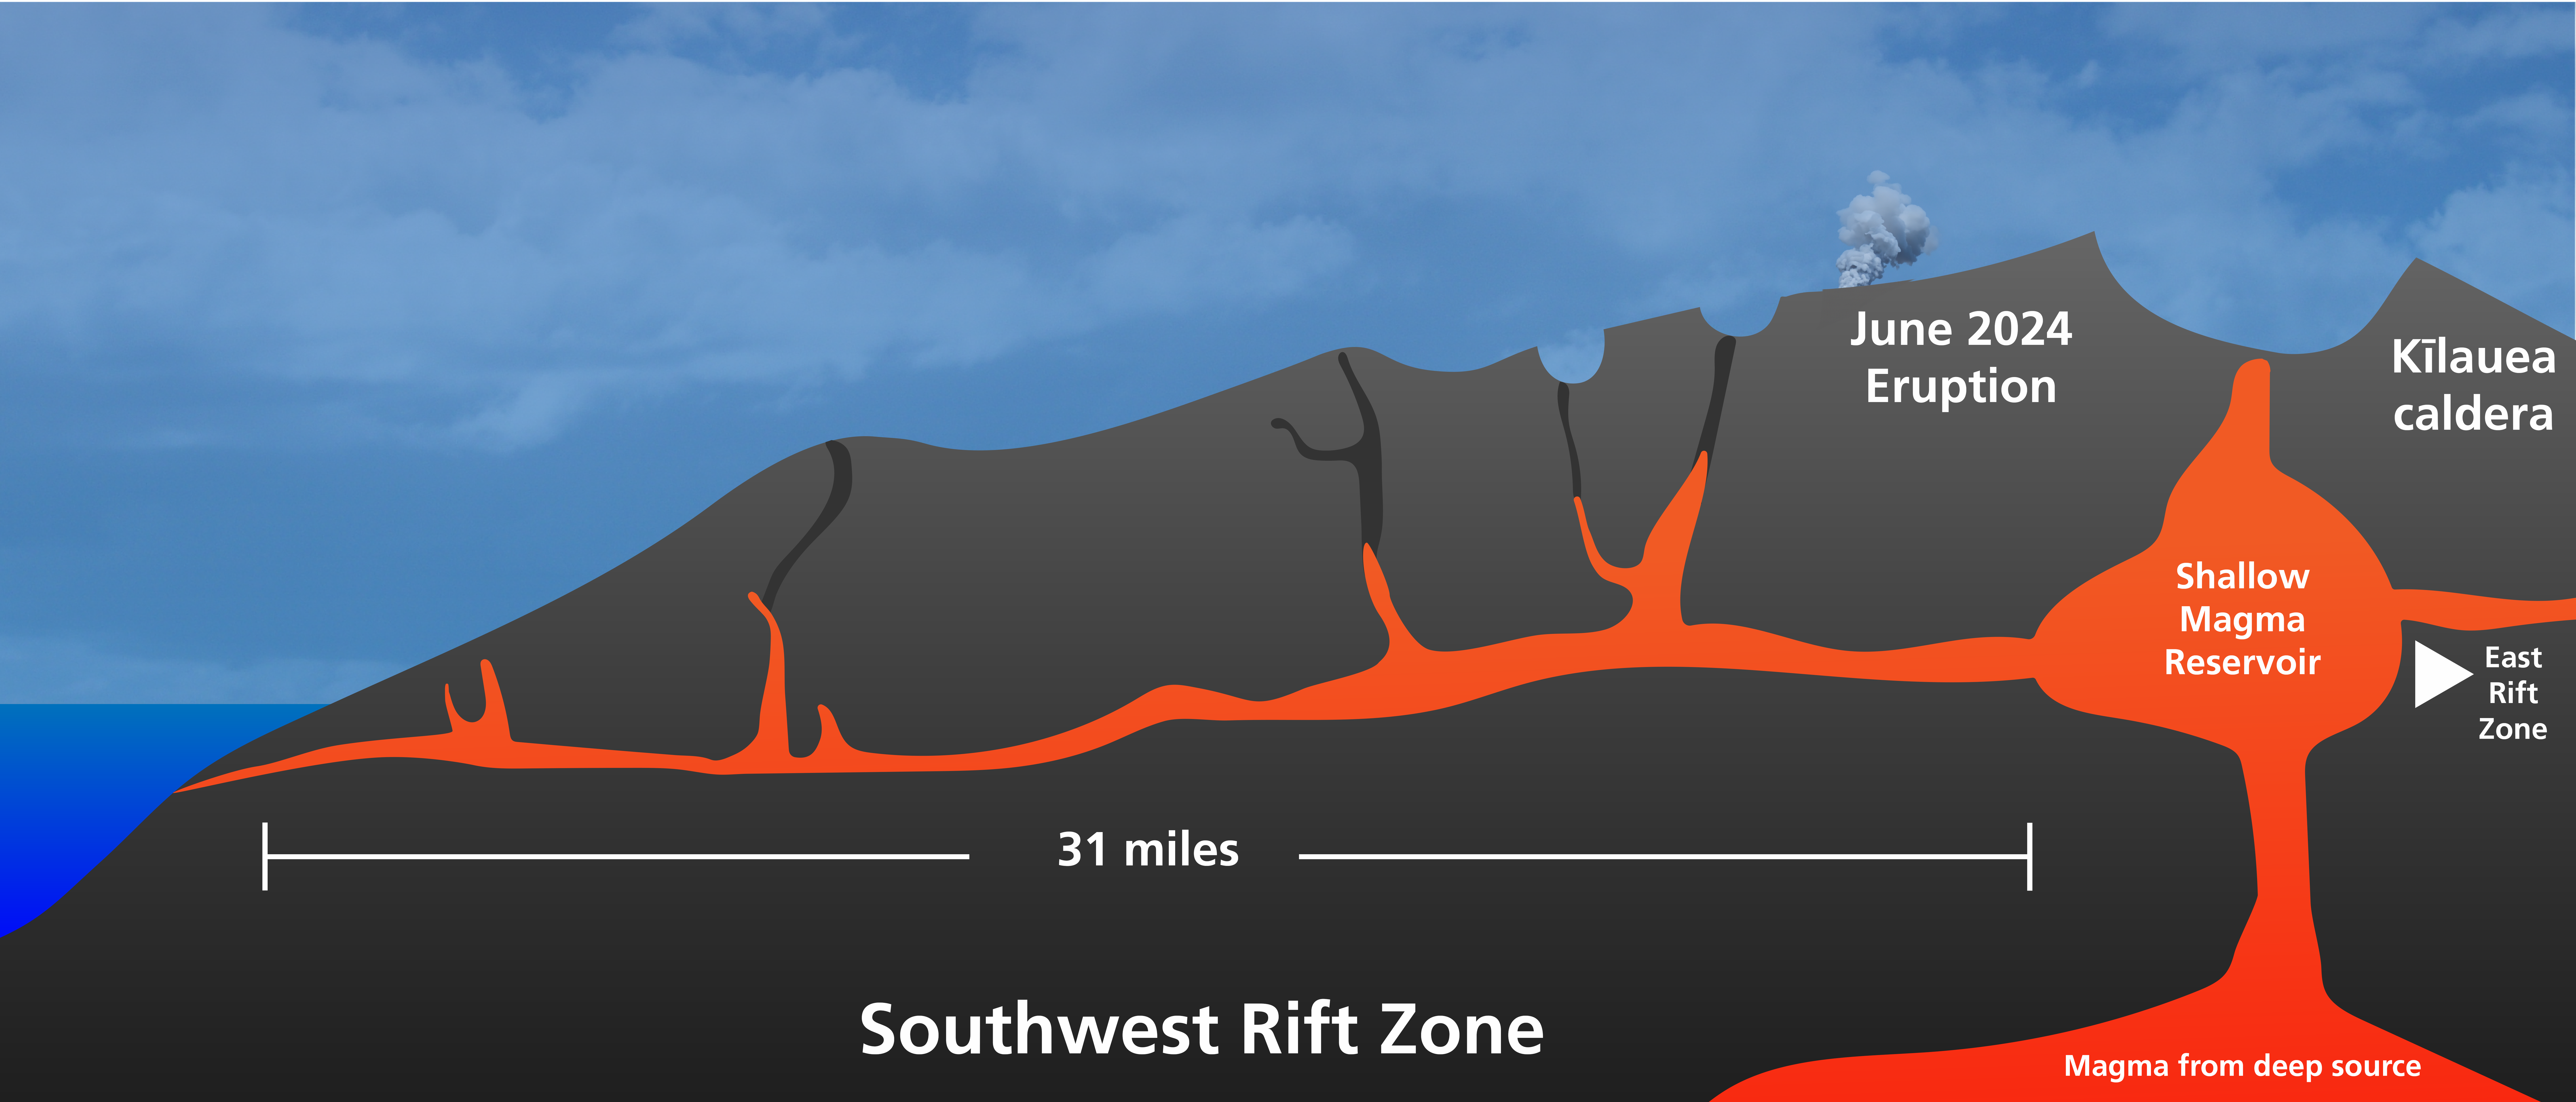 Illustration showing interor of Kīlauea volcano and southwest rift zone that extends 31 miles from the summit caldera. Magma travels from shallow reservoirs down the southwest rift zone to the eruption site near the summit caldera.